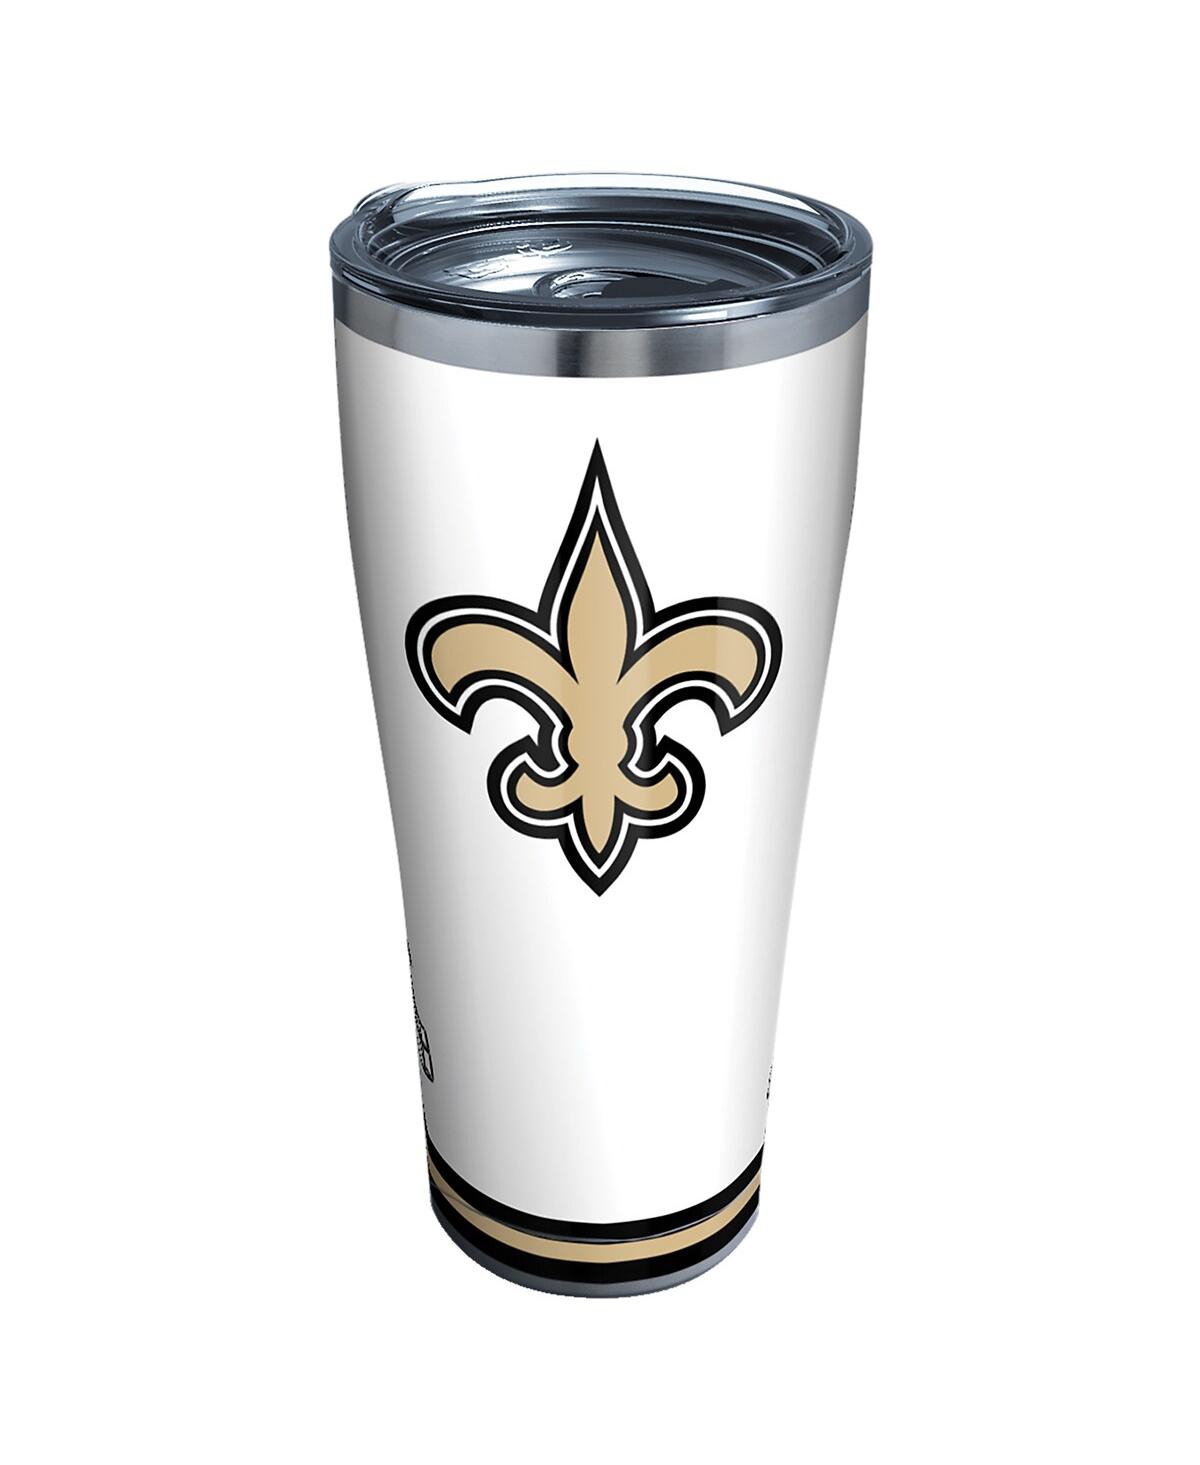 Tervis Tumbler New Orleans Saints 30 oz Arctic Stainless Steel Tumbler In White